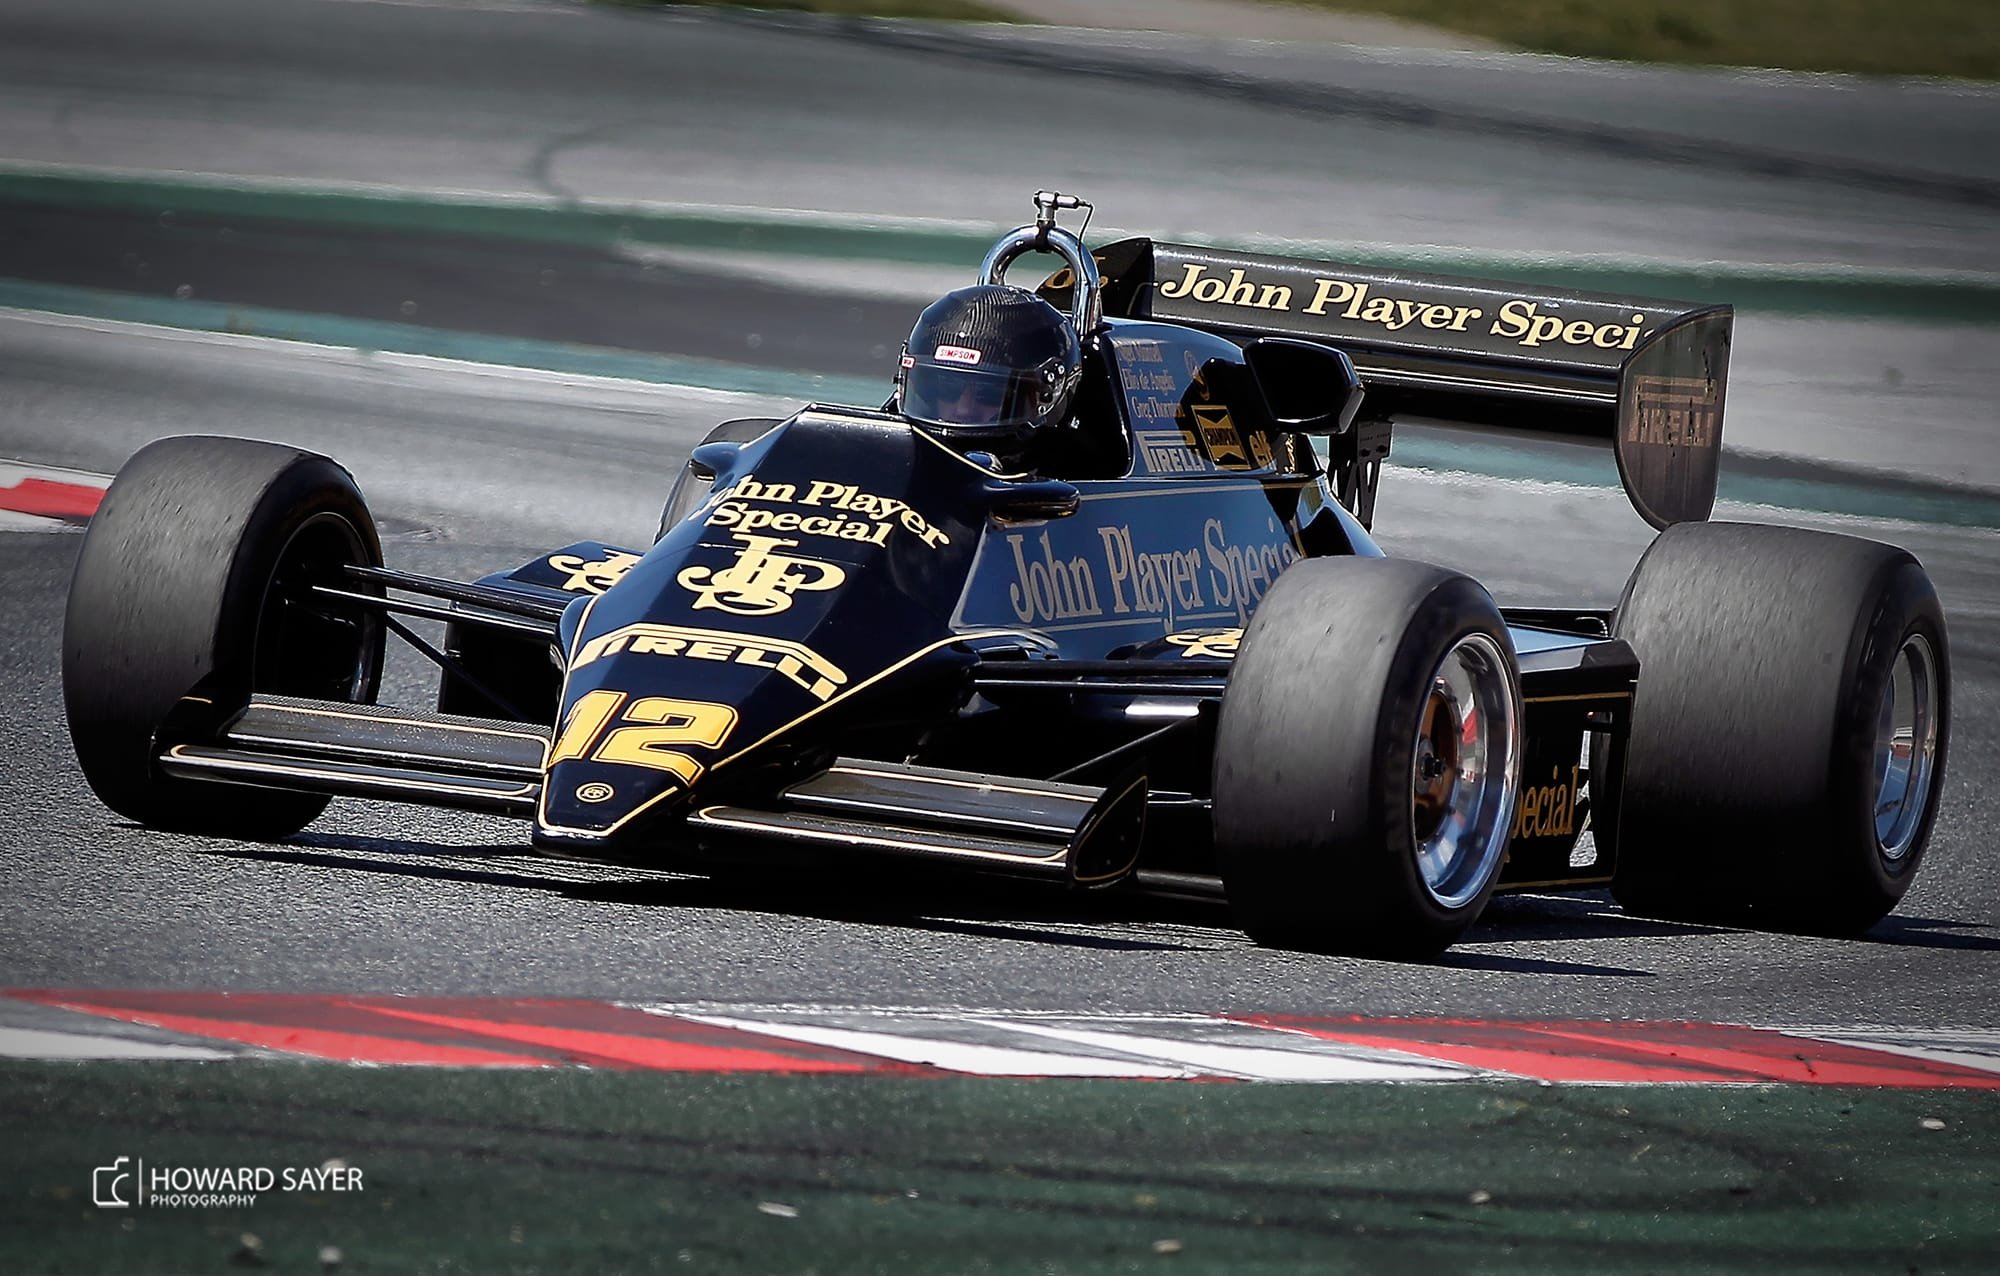 Classic Racing Cars At Montmelo F1 Circuit Howard Sayer Photography